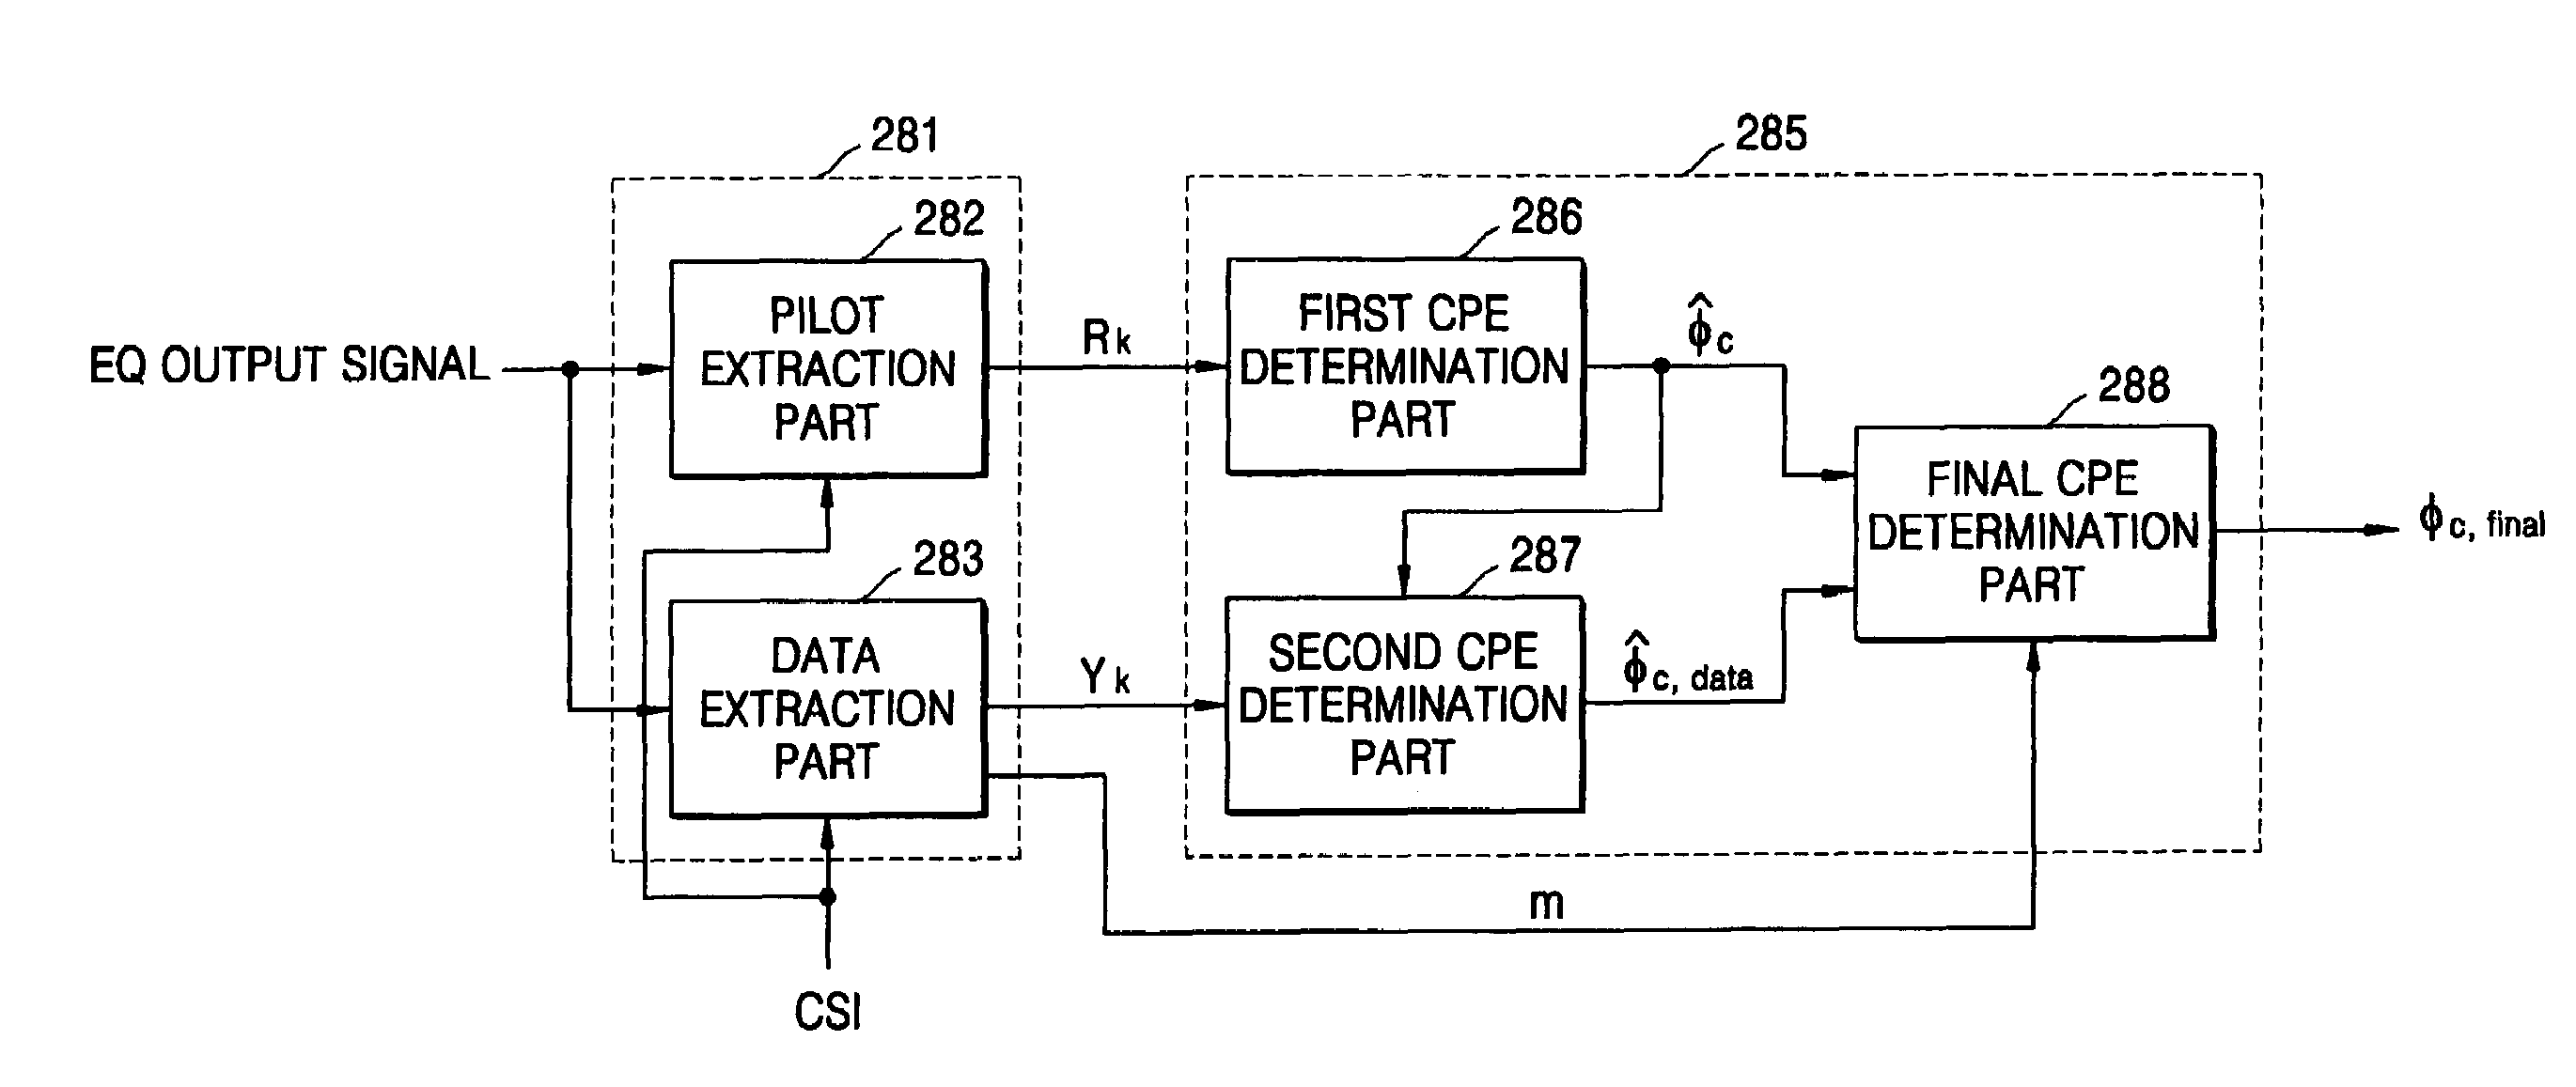 OFDM signal receiving apparatus and method for estimating common phase error of OFDM signals using data subcarriers